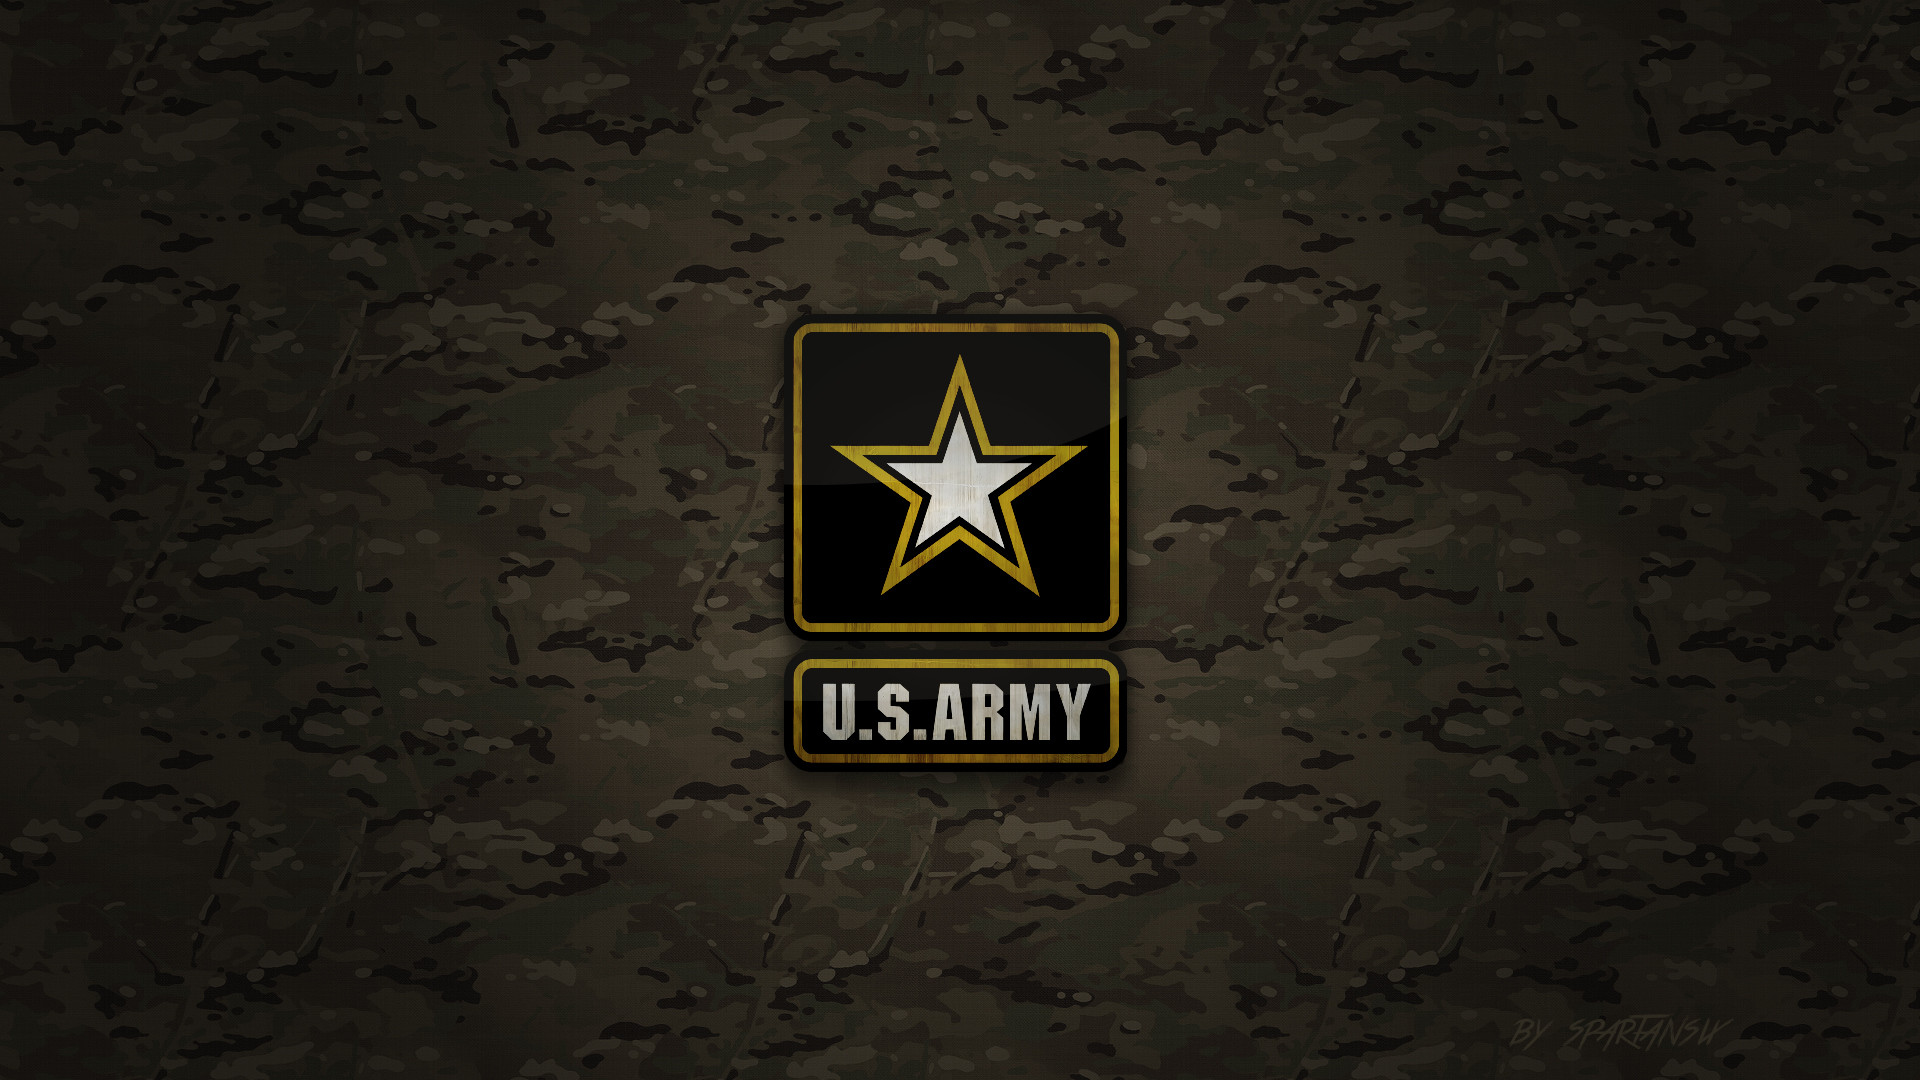 1920x1080 awesome army full screen | HDwallpaper | Pinterest | Army and Hd desktop